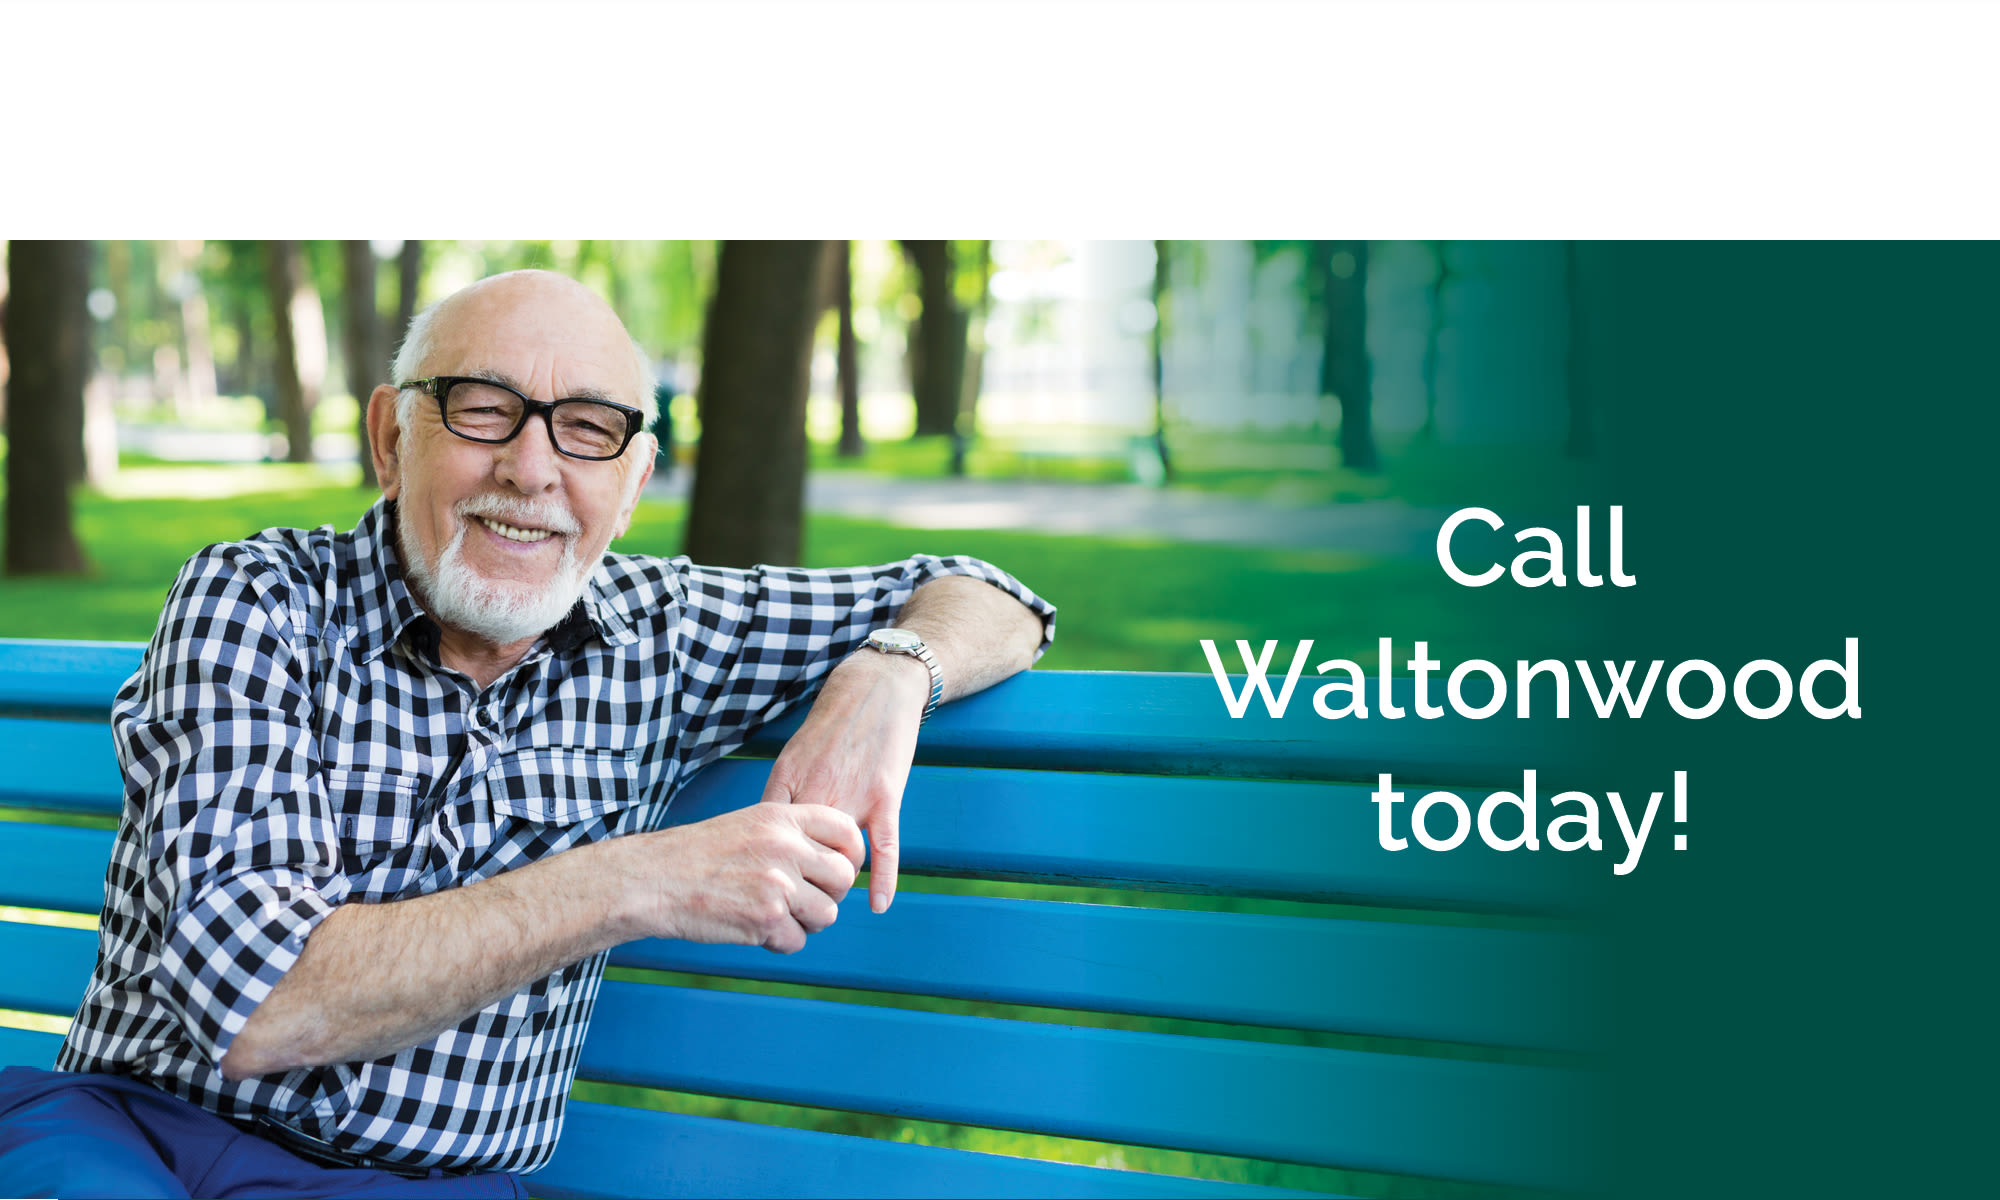 Schedule your visit today at Waltonwood in West Bloomfield, Michigan